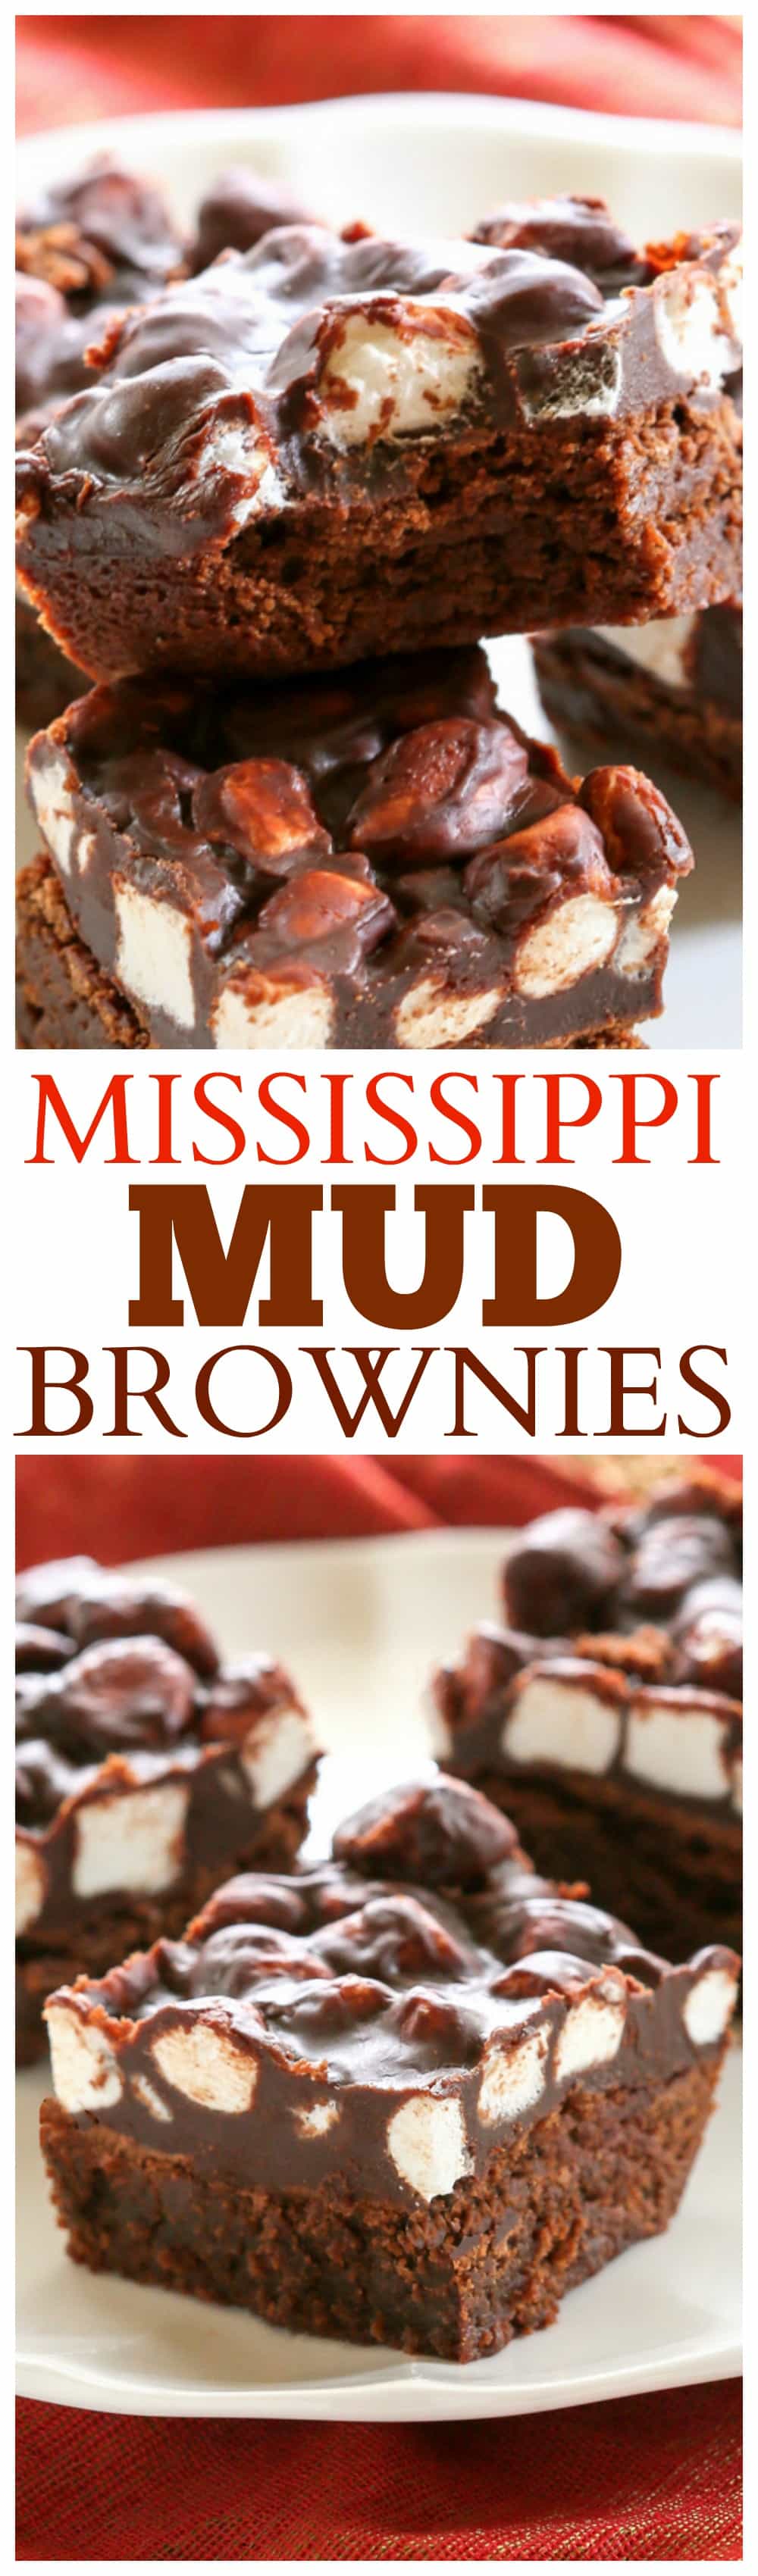 Mississippi Mud Brownies - this is the recipe you want to make. It's perfection! #mississippi #brownies #bar #recipe #dessert